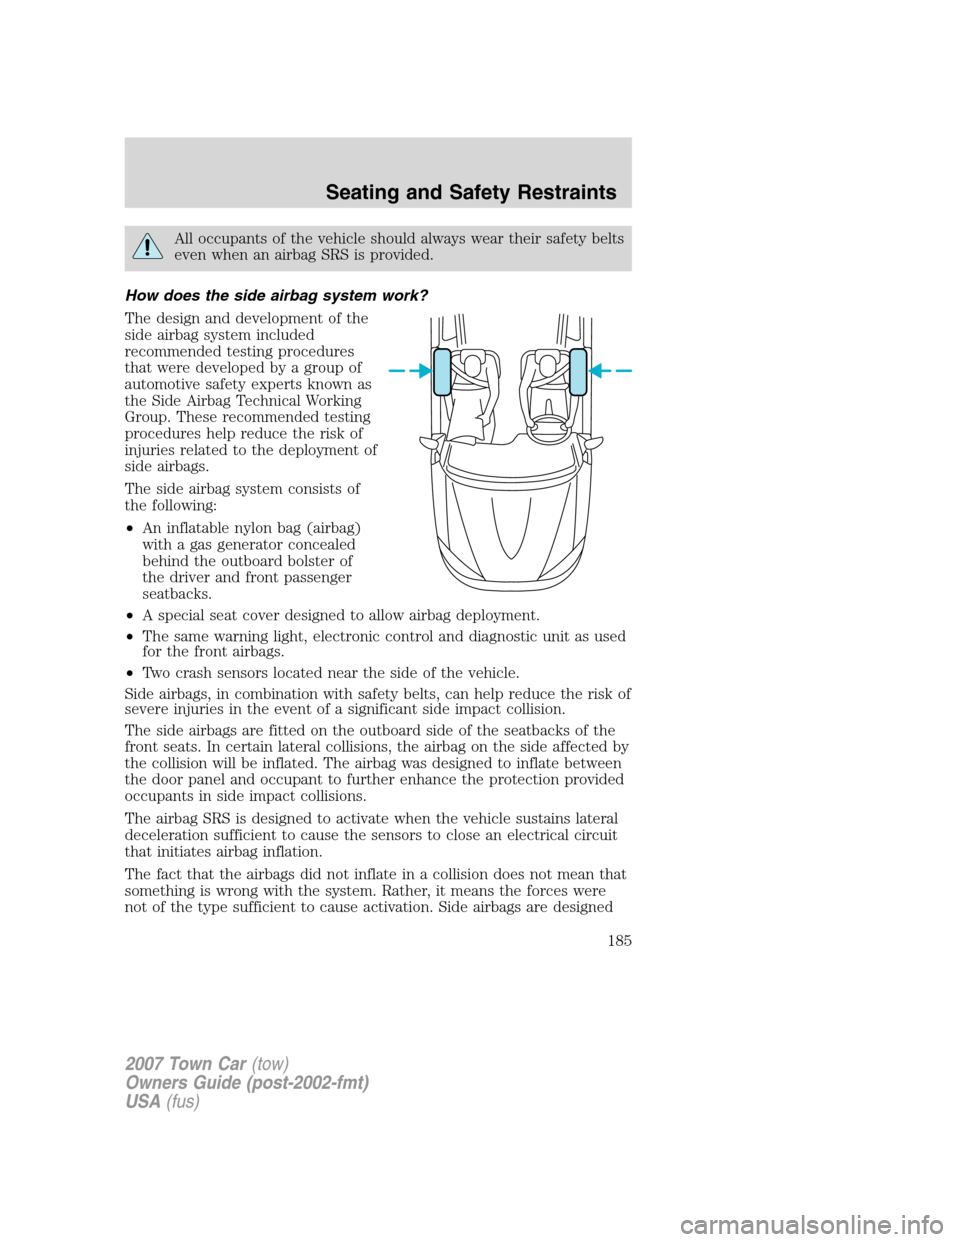 LINCOLN TOWN CAR 2007 Owners Manual All occupants of the vehicle should always wear their safety belts
even when an airbag SRS is provided.
How does the side airbag system work?
The design and development of the
side airbag system inclu